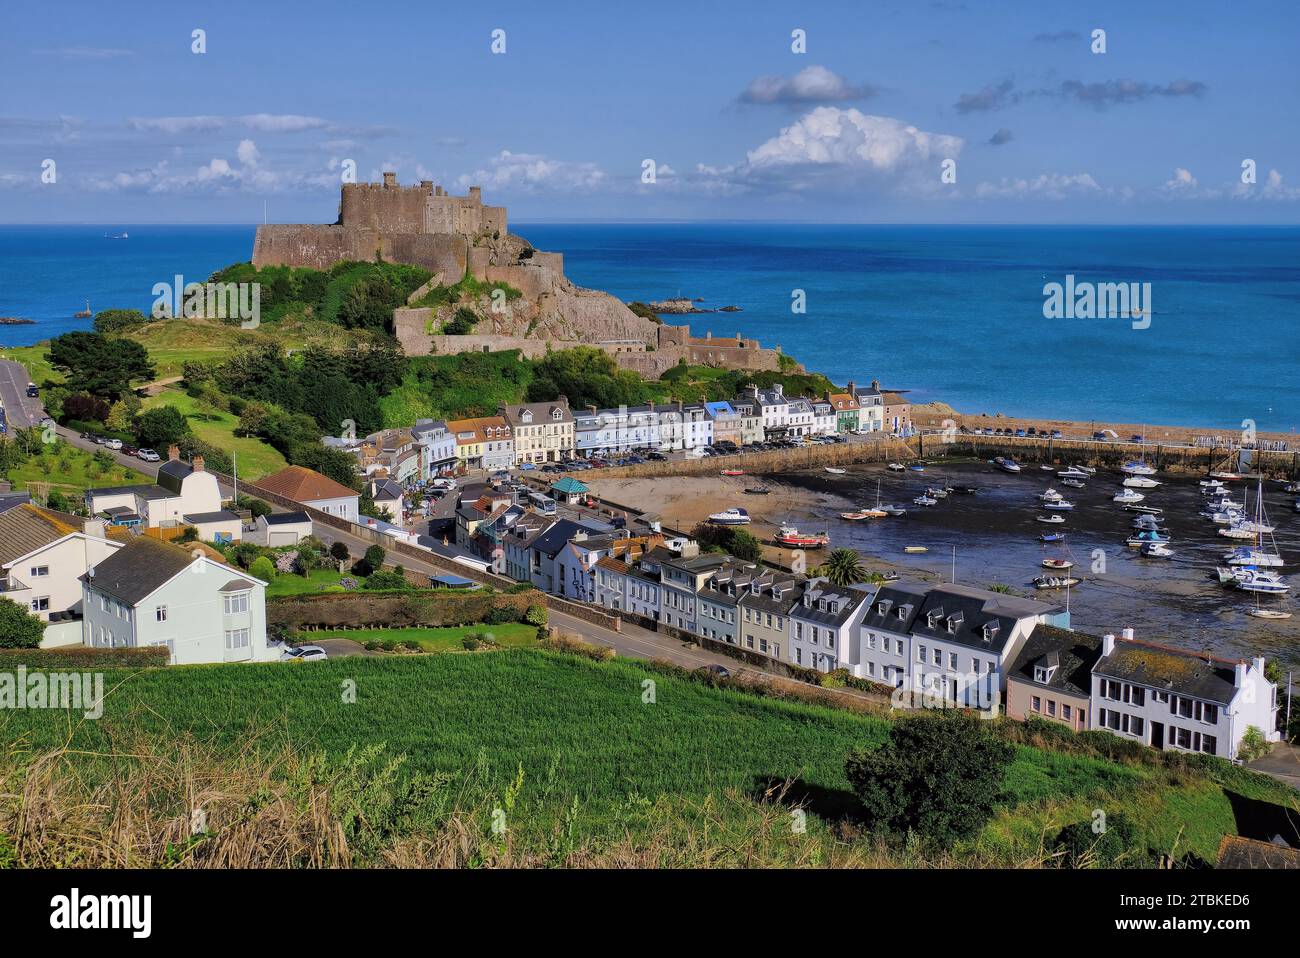 Gorey: Elevated view of Mont Orgueil Castle, village, boats, beach, pier and sea at Gorey, Jersey, Channel Islands, UK Stock Photo